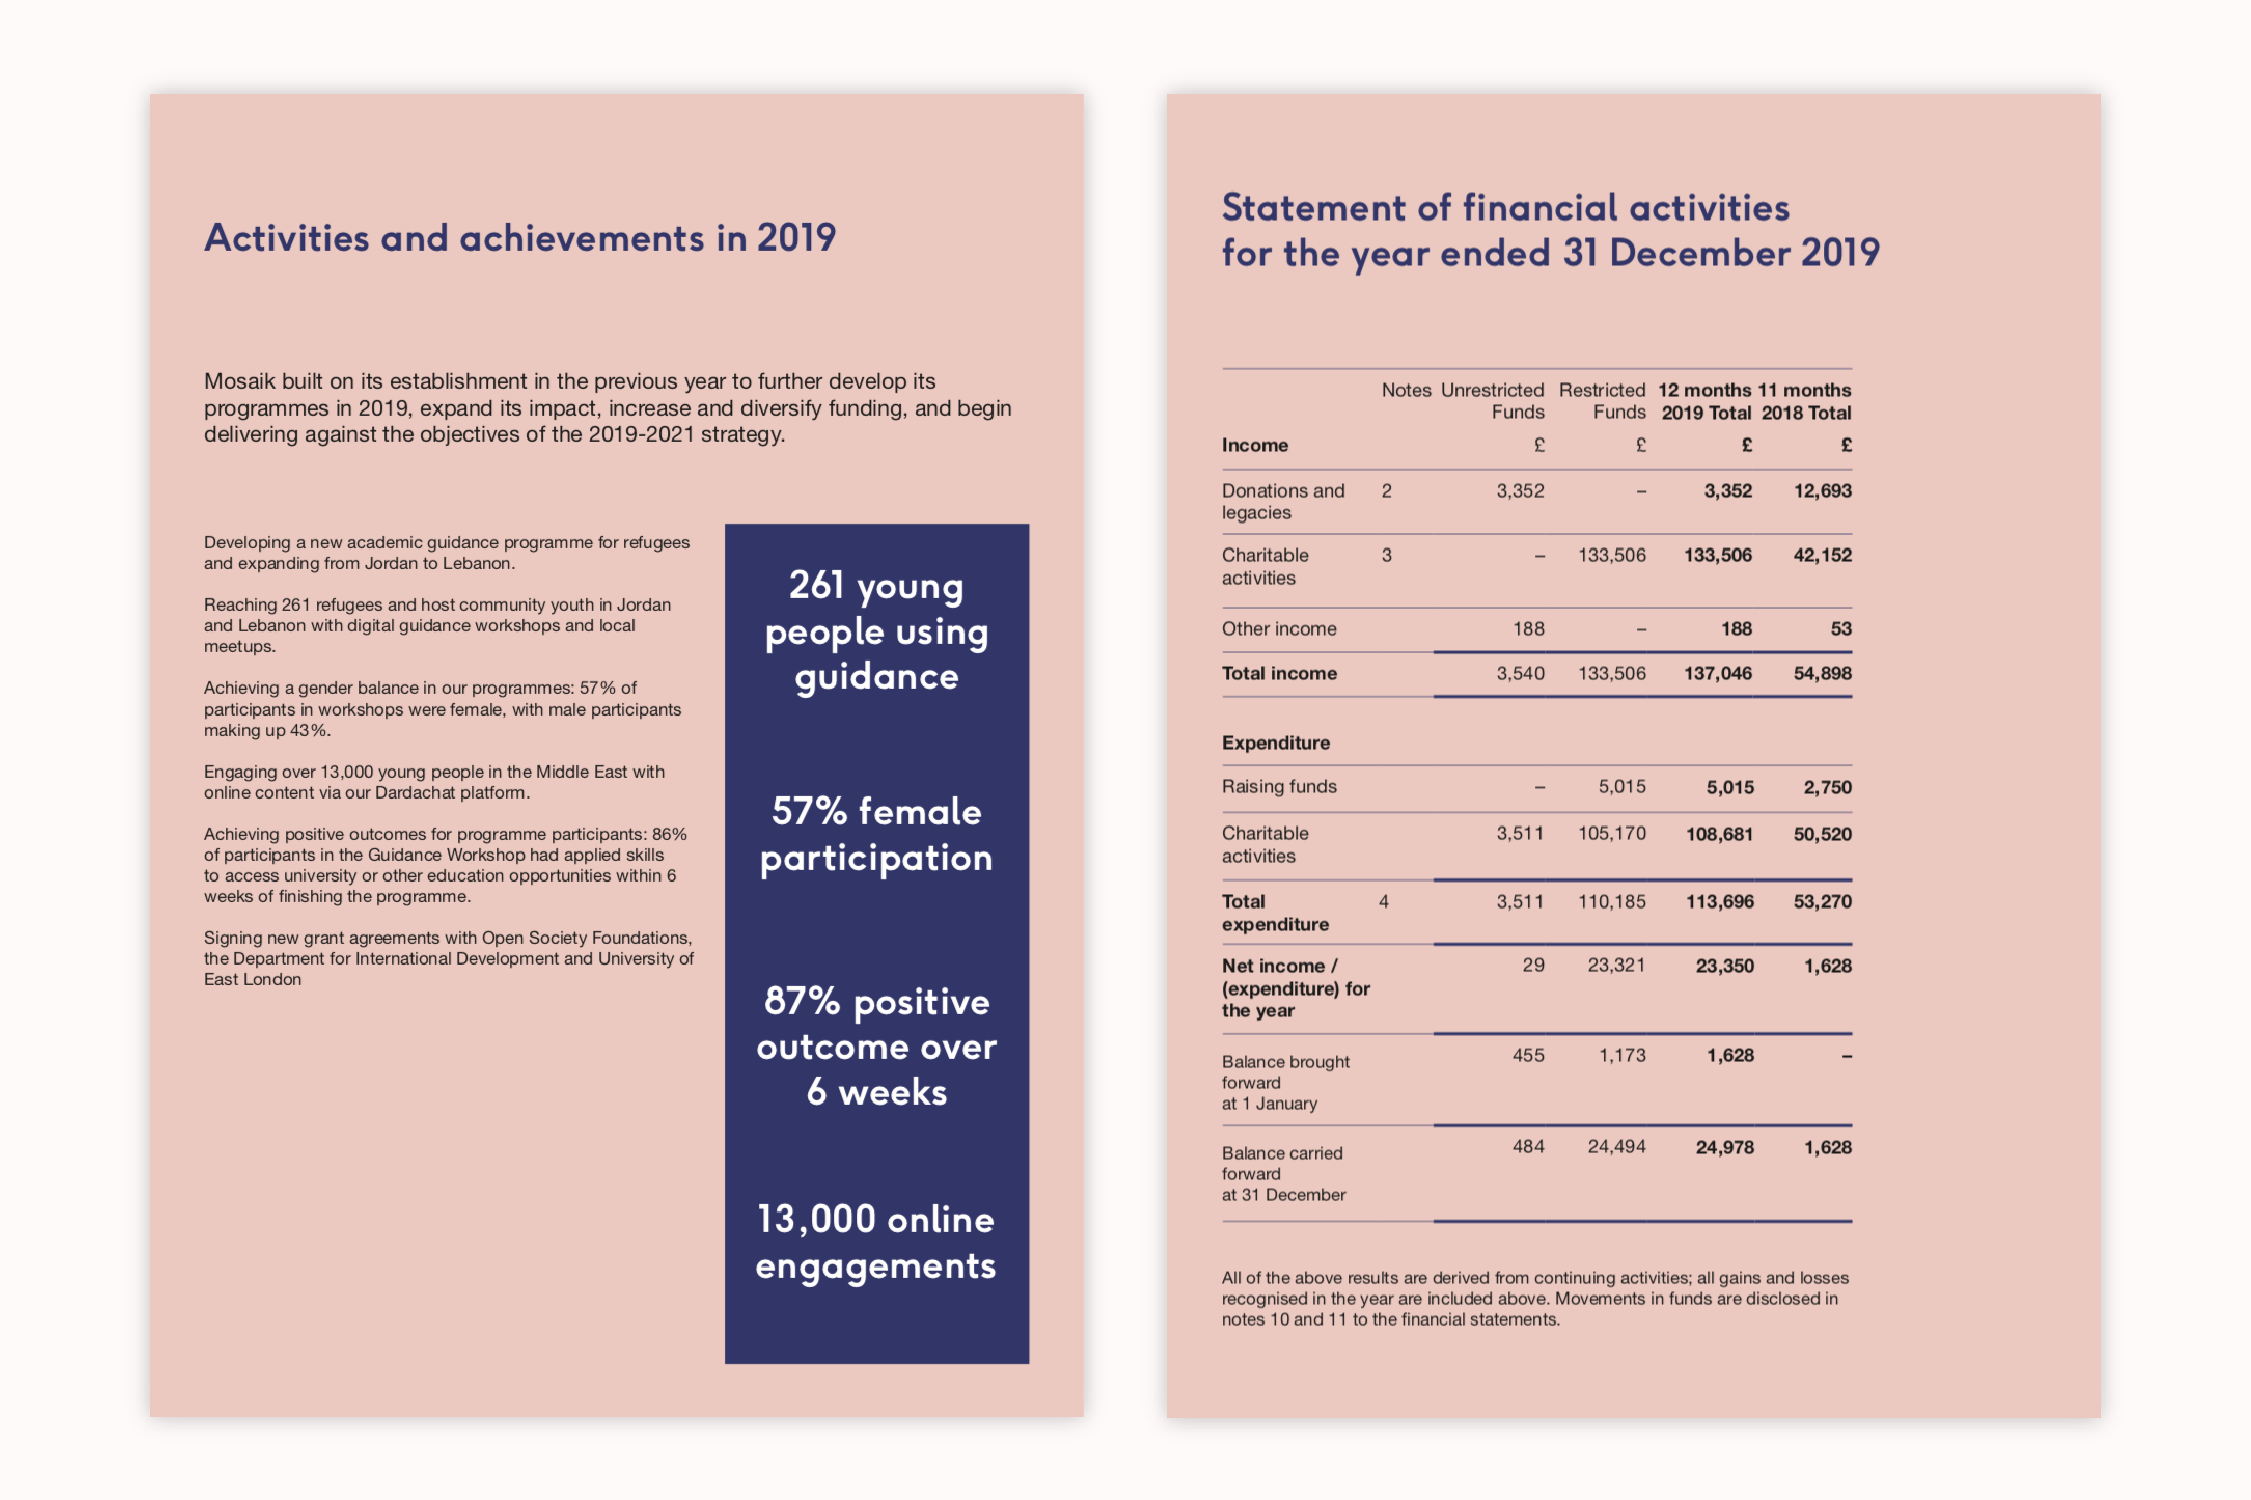 The annual report showing financial information